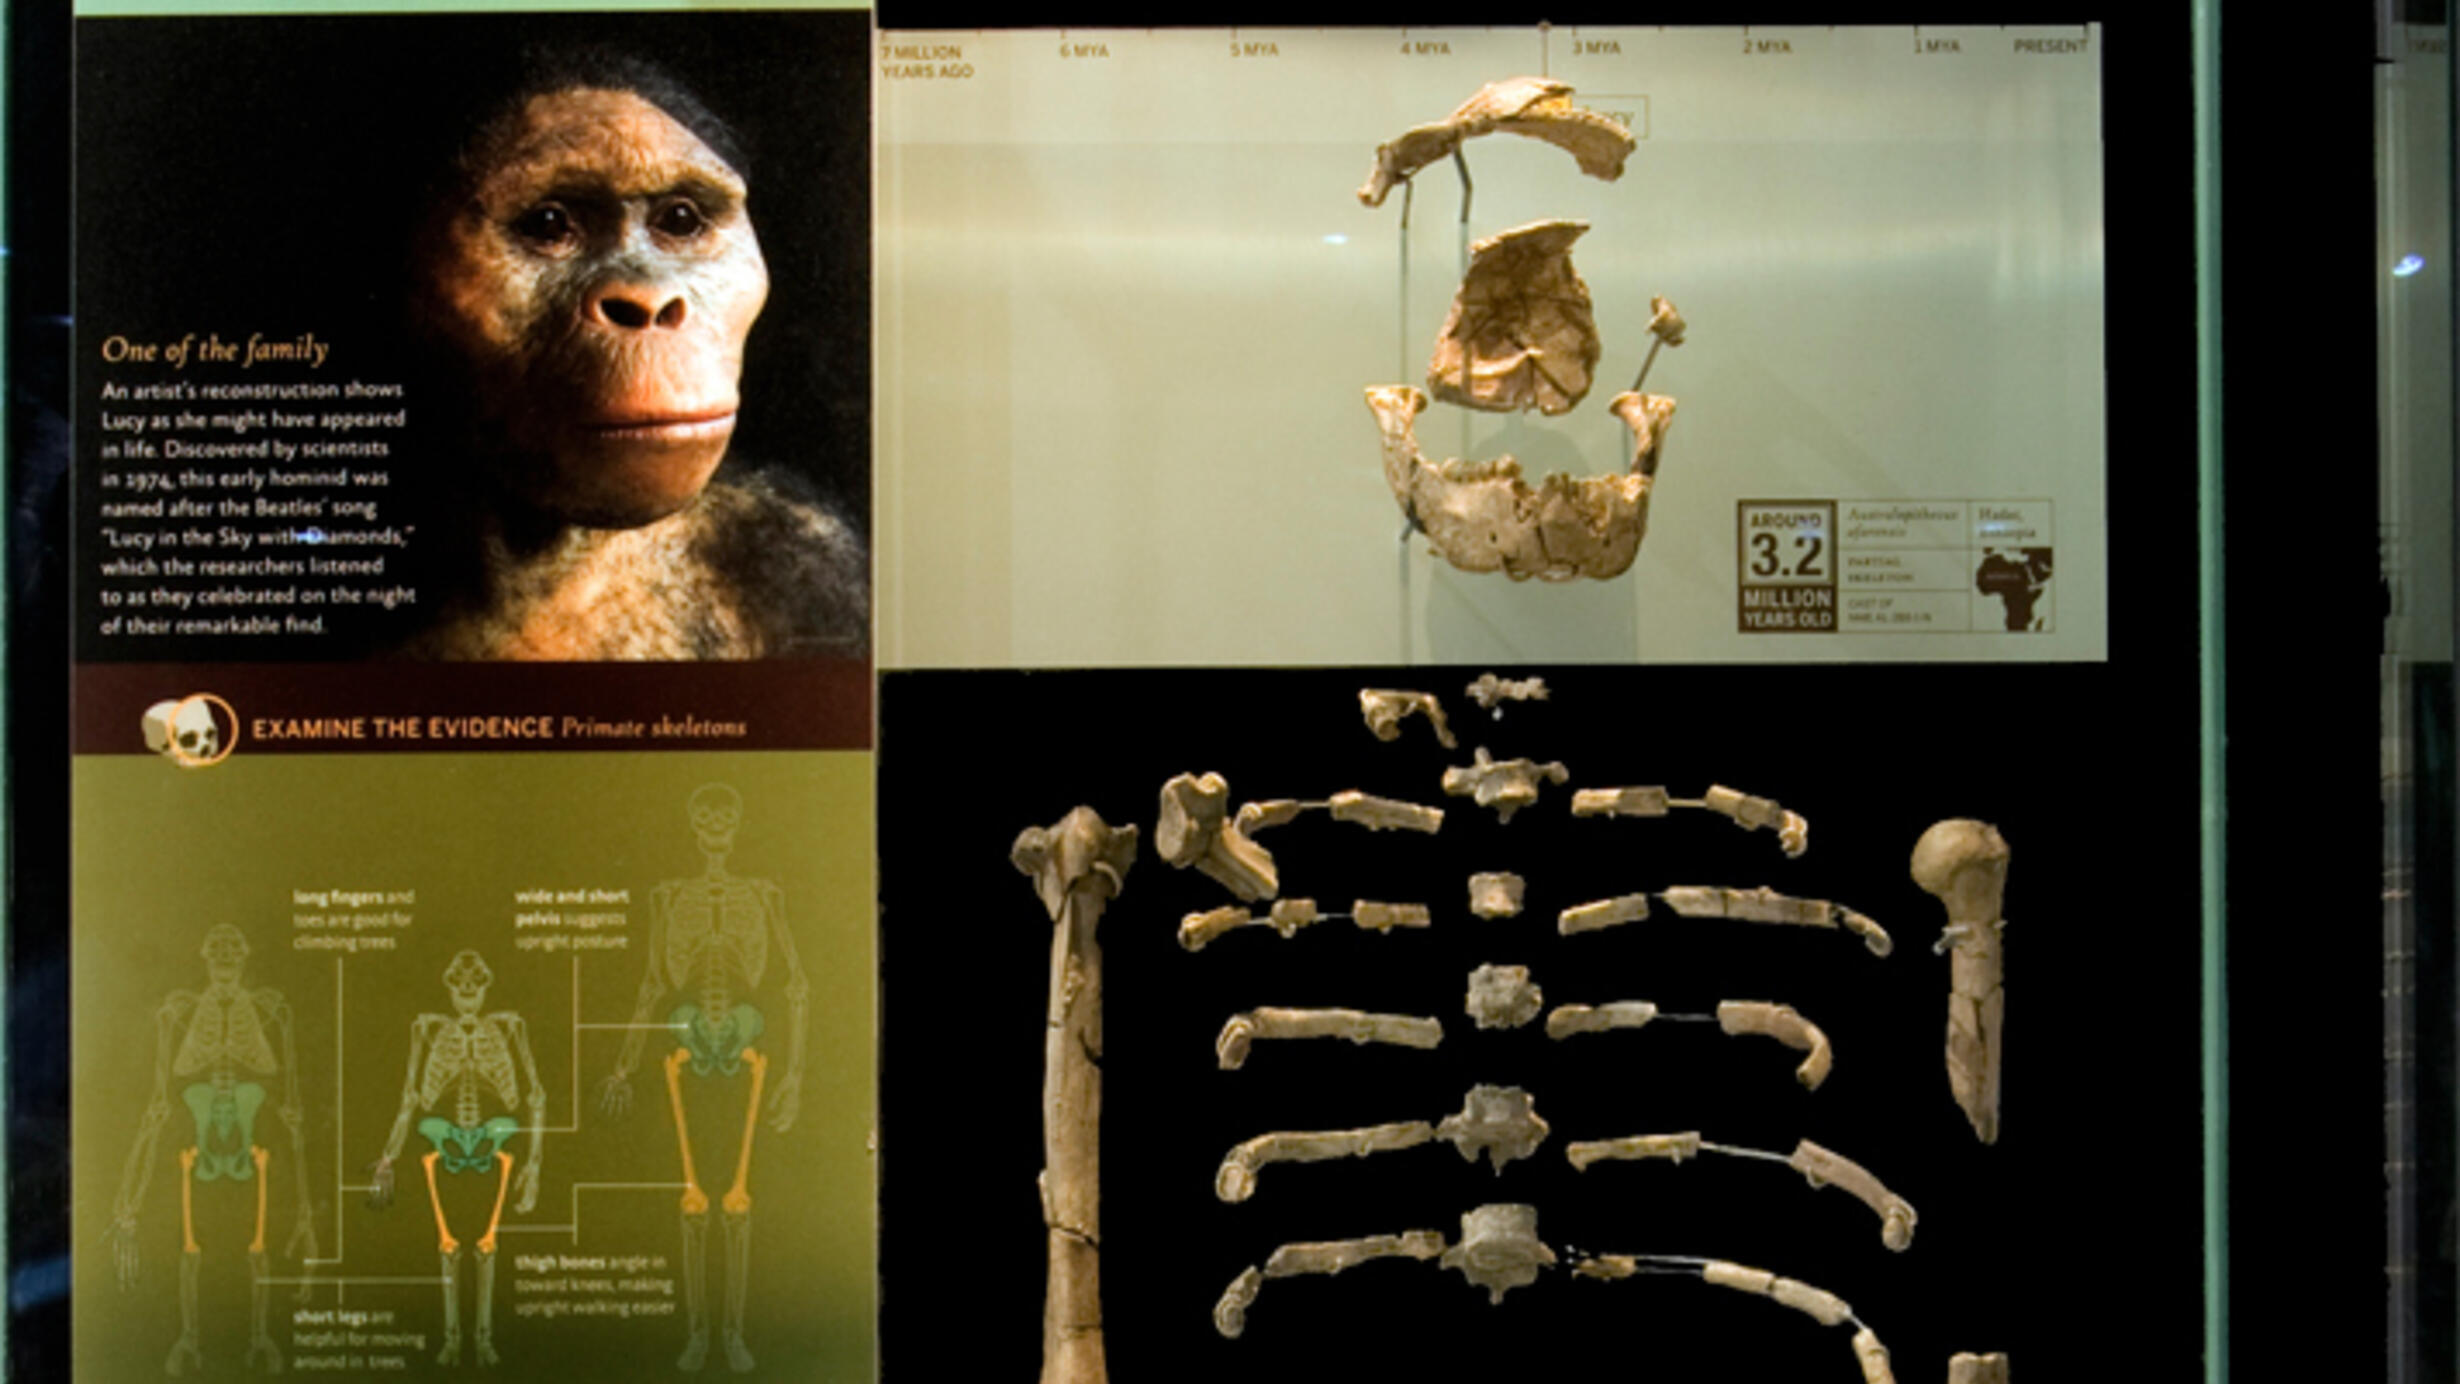 A display case with a partial skeleton, a small sketch of three skeletons, and an artistic rendering including flesh and hair showing how this early hominid may have appeared.